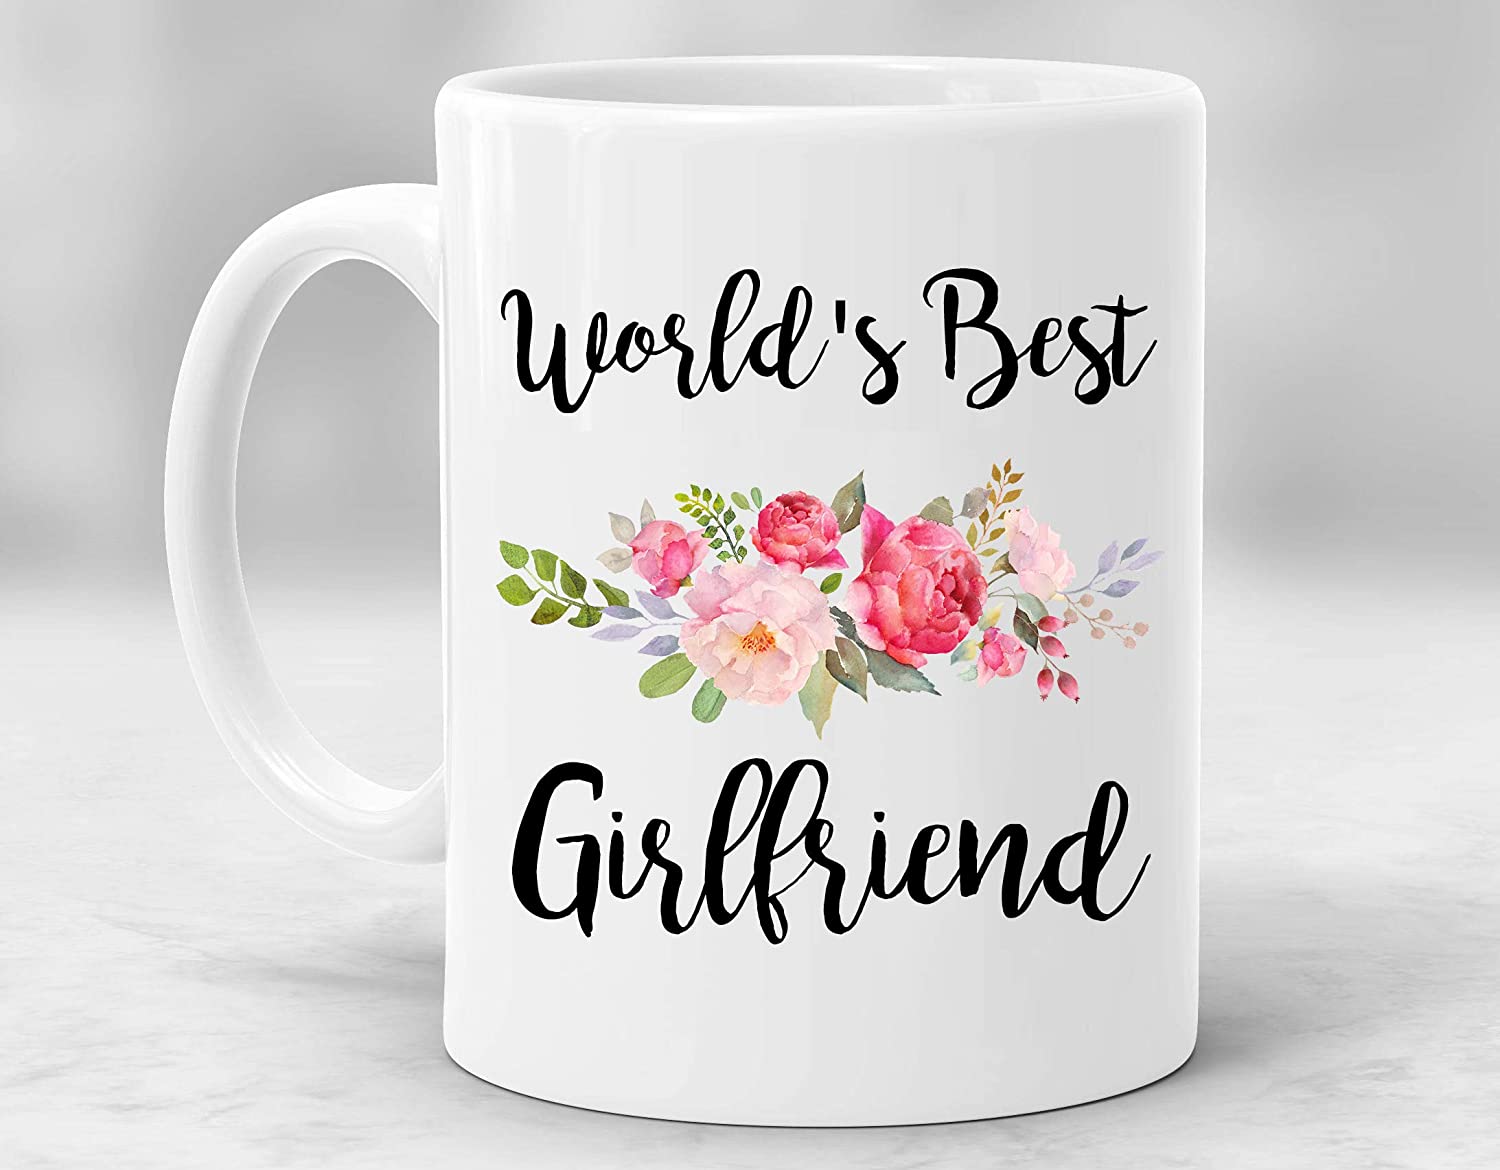 presents to get for your girlfriend